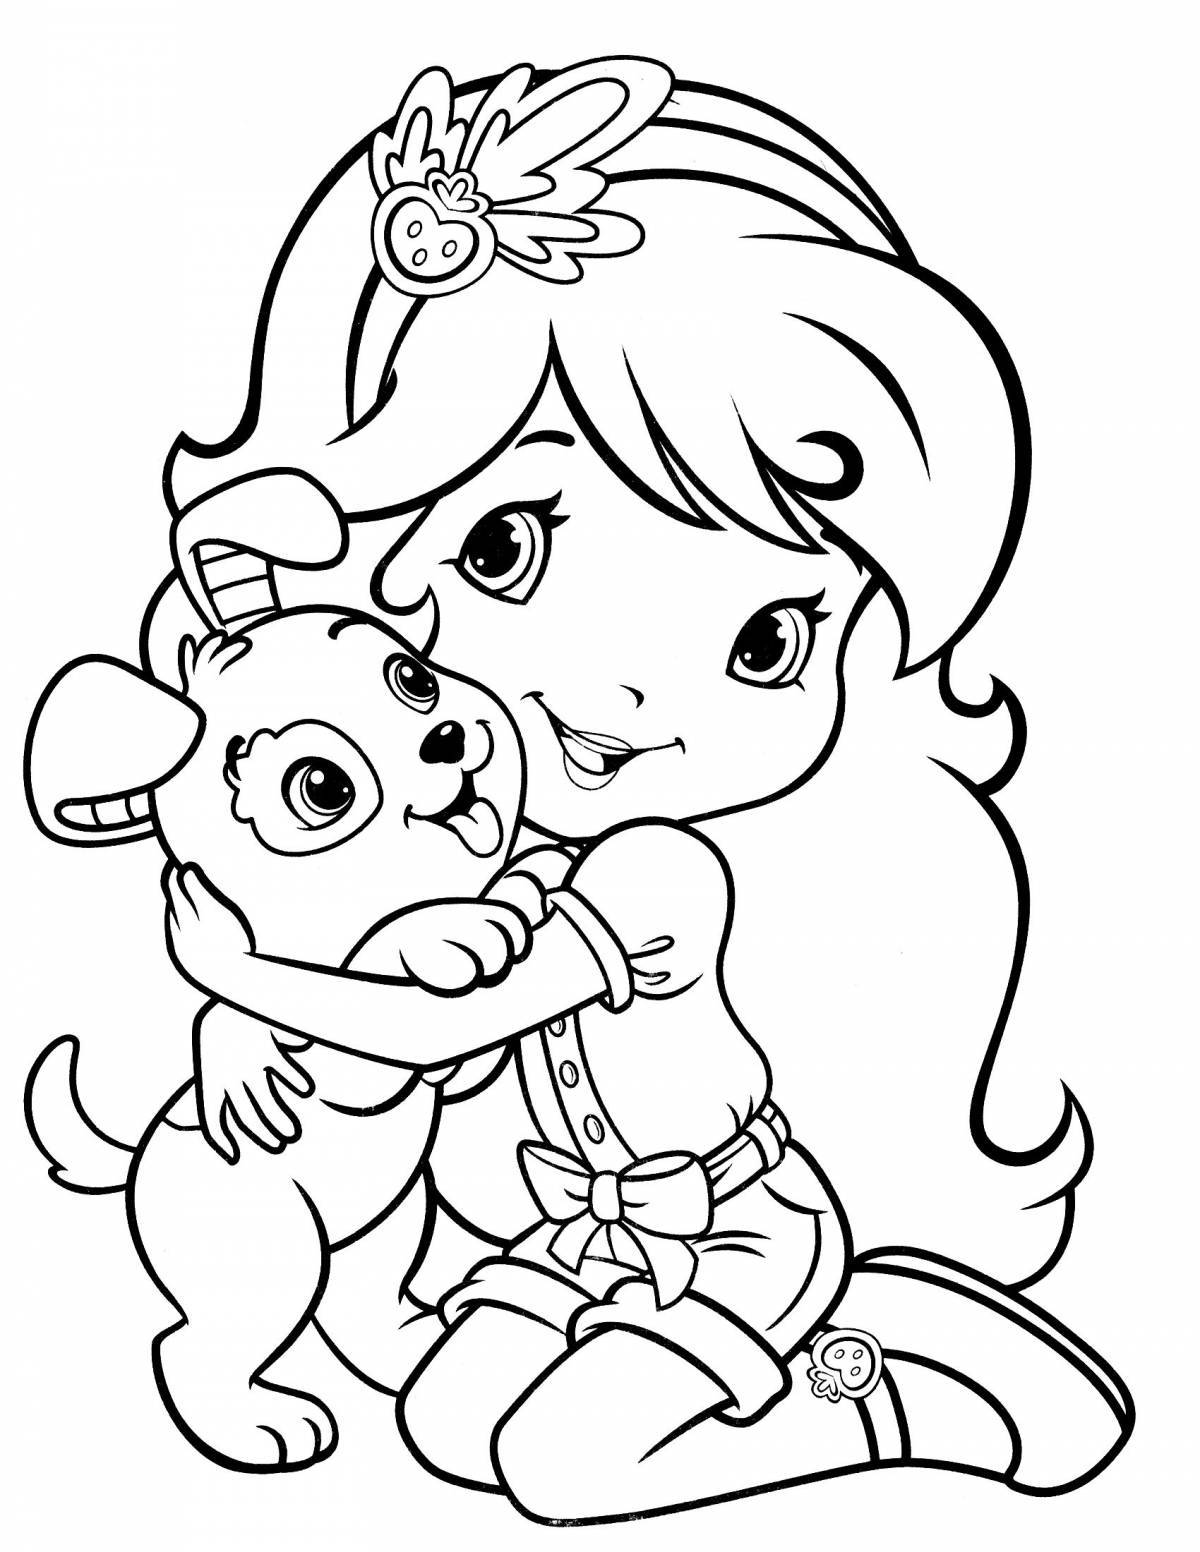 Color-frenzy coloring page print for girls